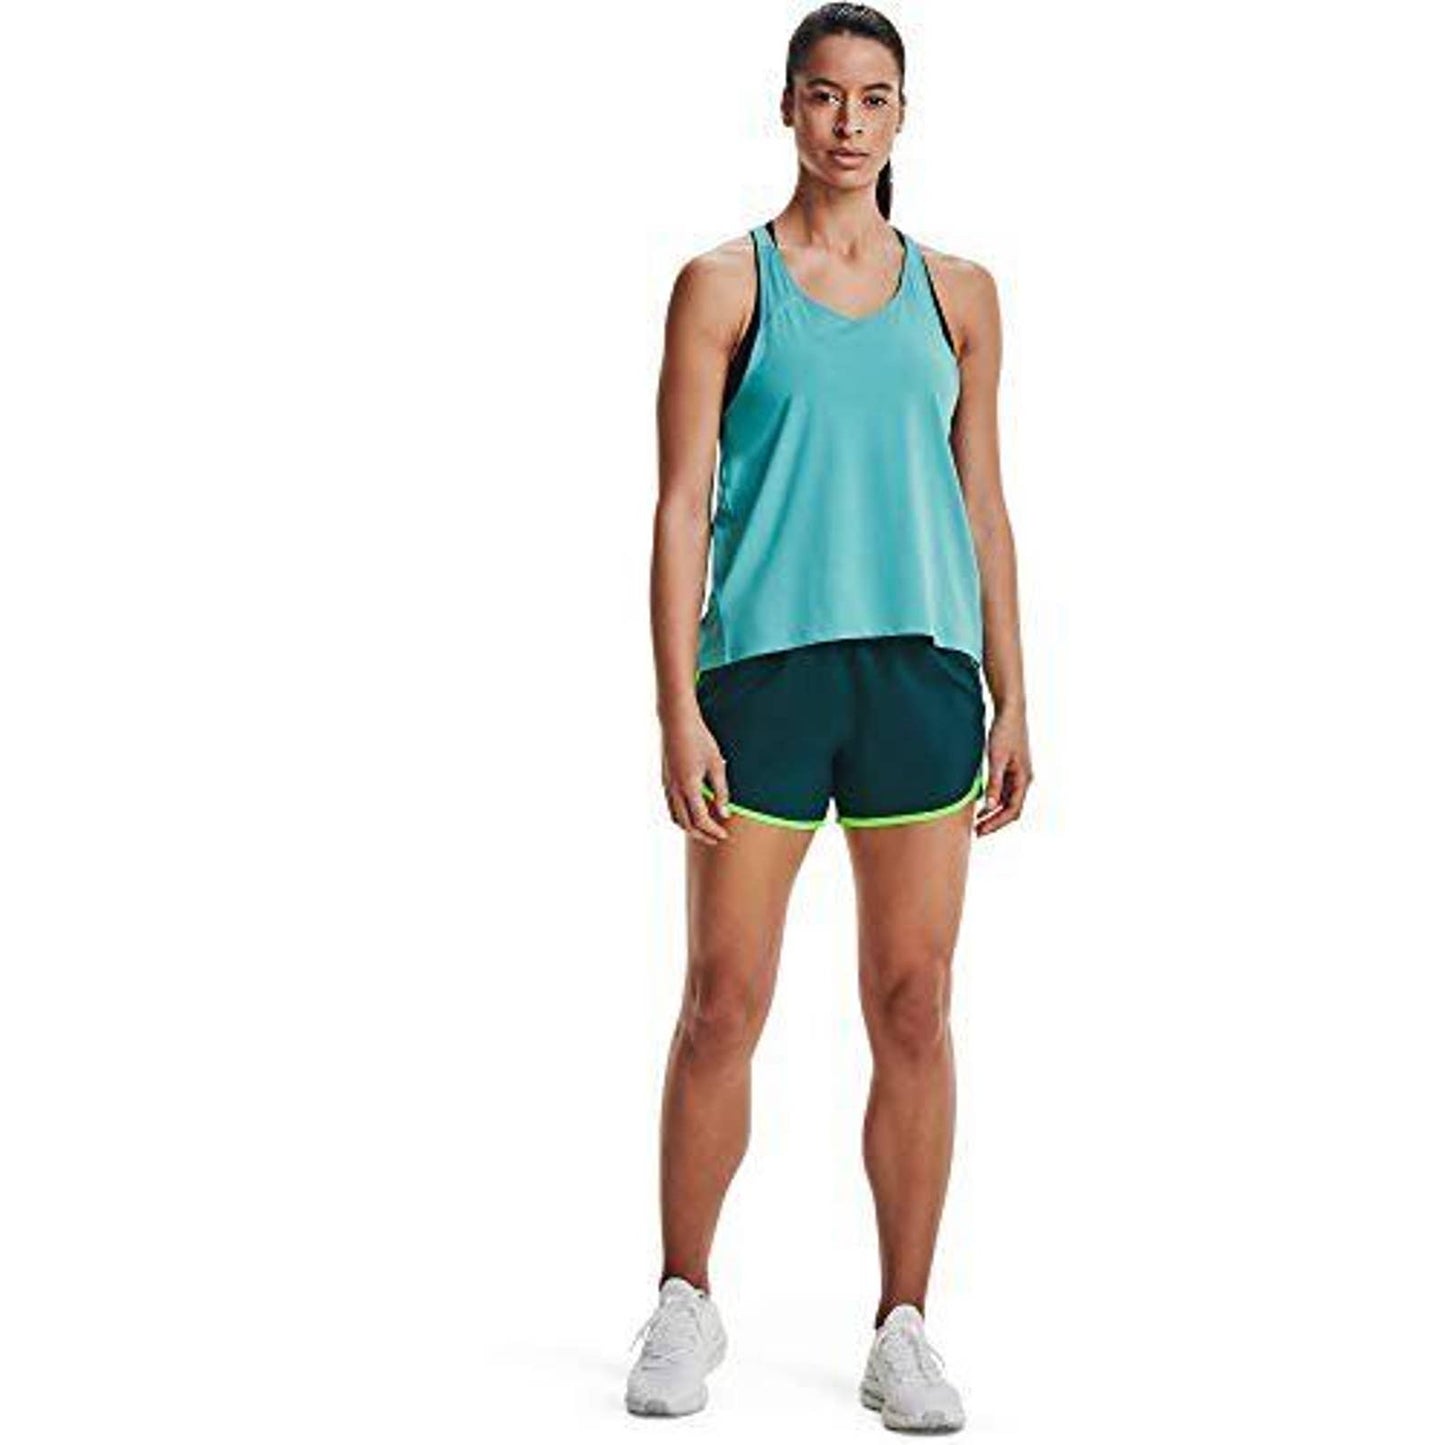 Under Armour Womens Fly-By 2. Dark Cyan Cosmos Reflective Shorts, NWT